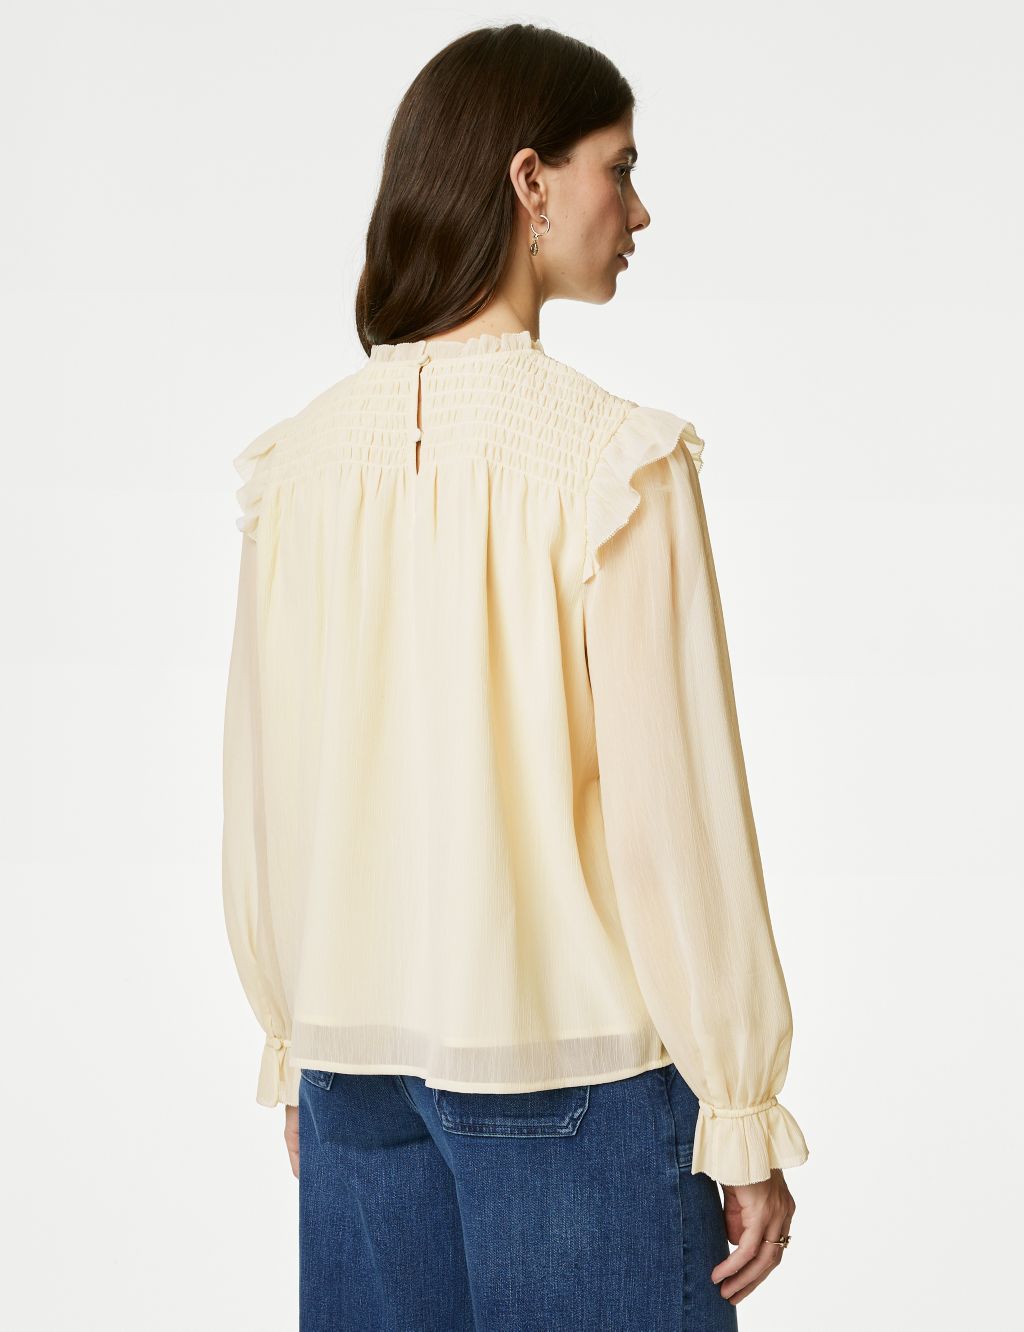 Shirred High Neck Frill Detail Blouse image 5